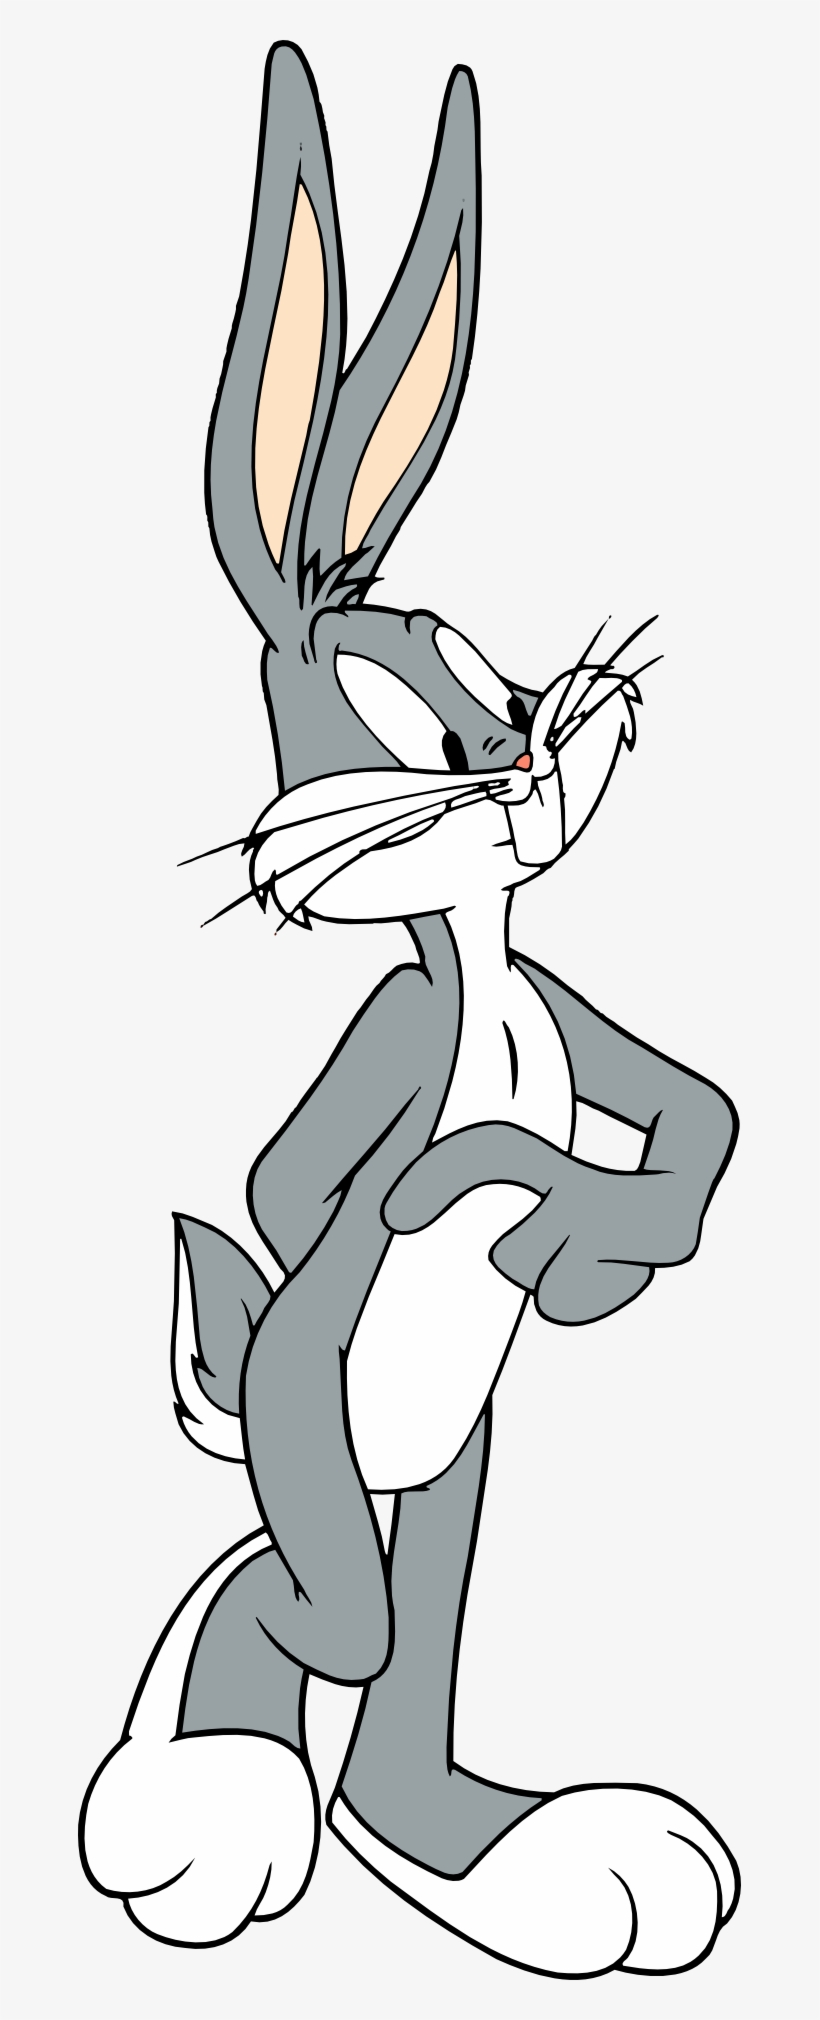 Bugs Bunny Begins To Flirt While Not Wearing His Gloves - Багз Банни ...